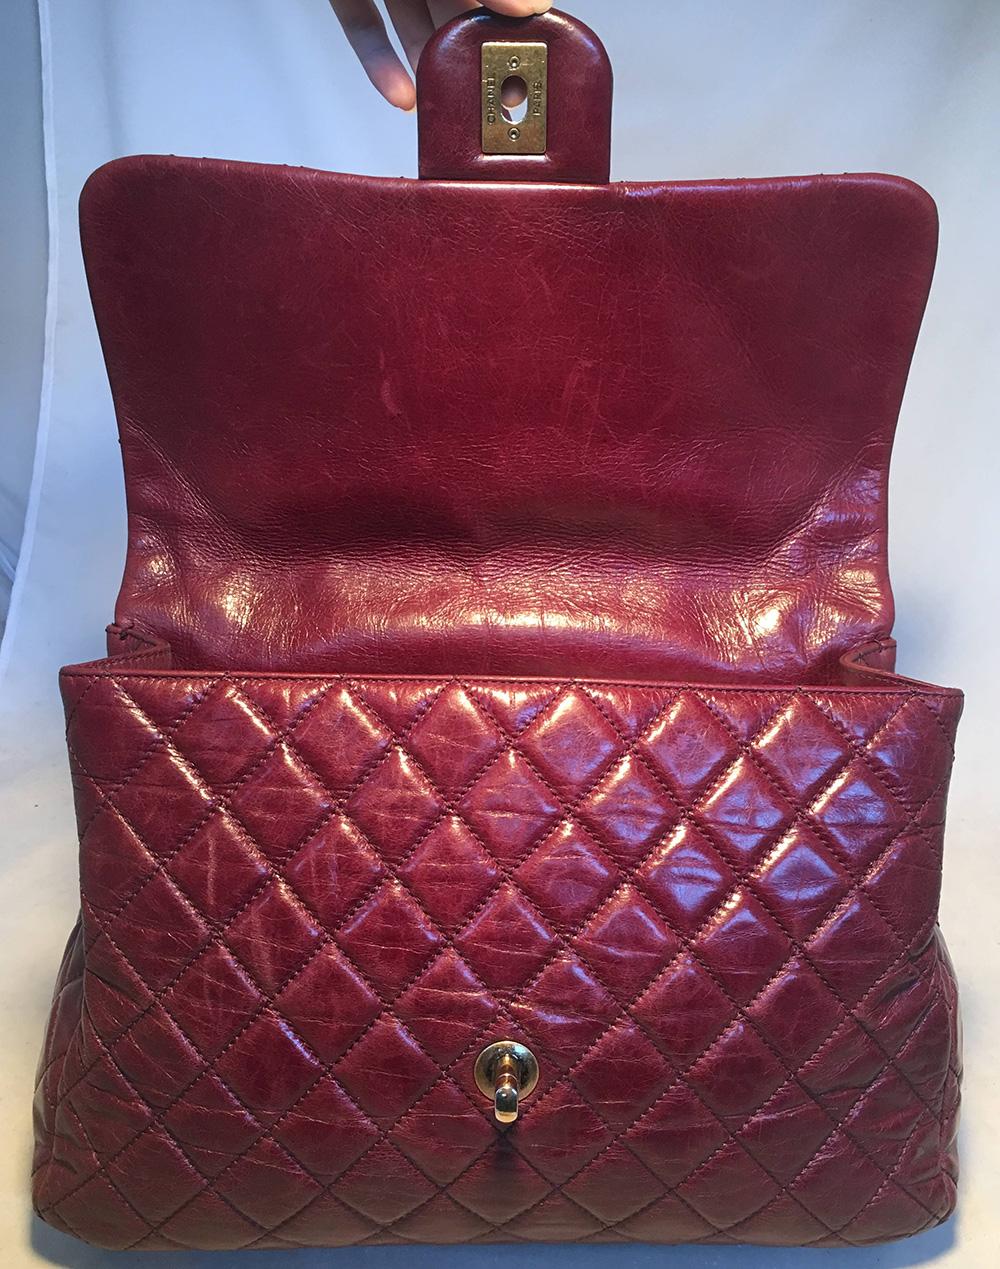 Chanel Maroon Distressed Quilted Leather Large Classic Flap Shoulder Bag 2